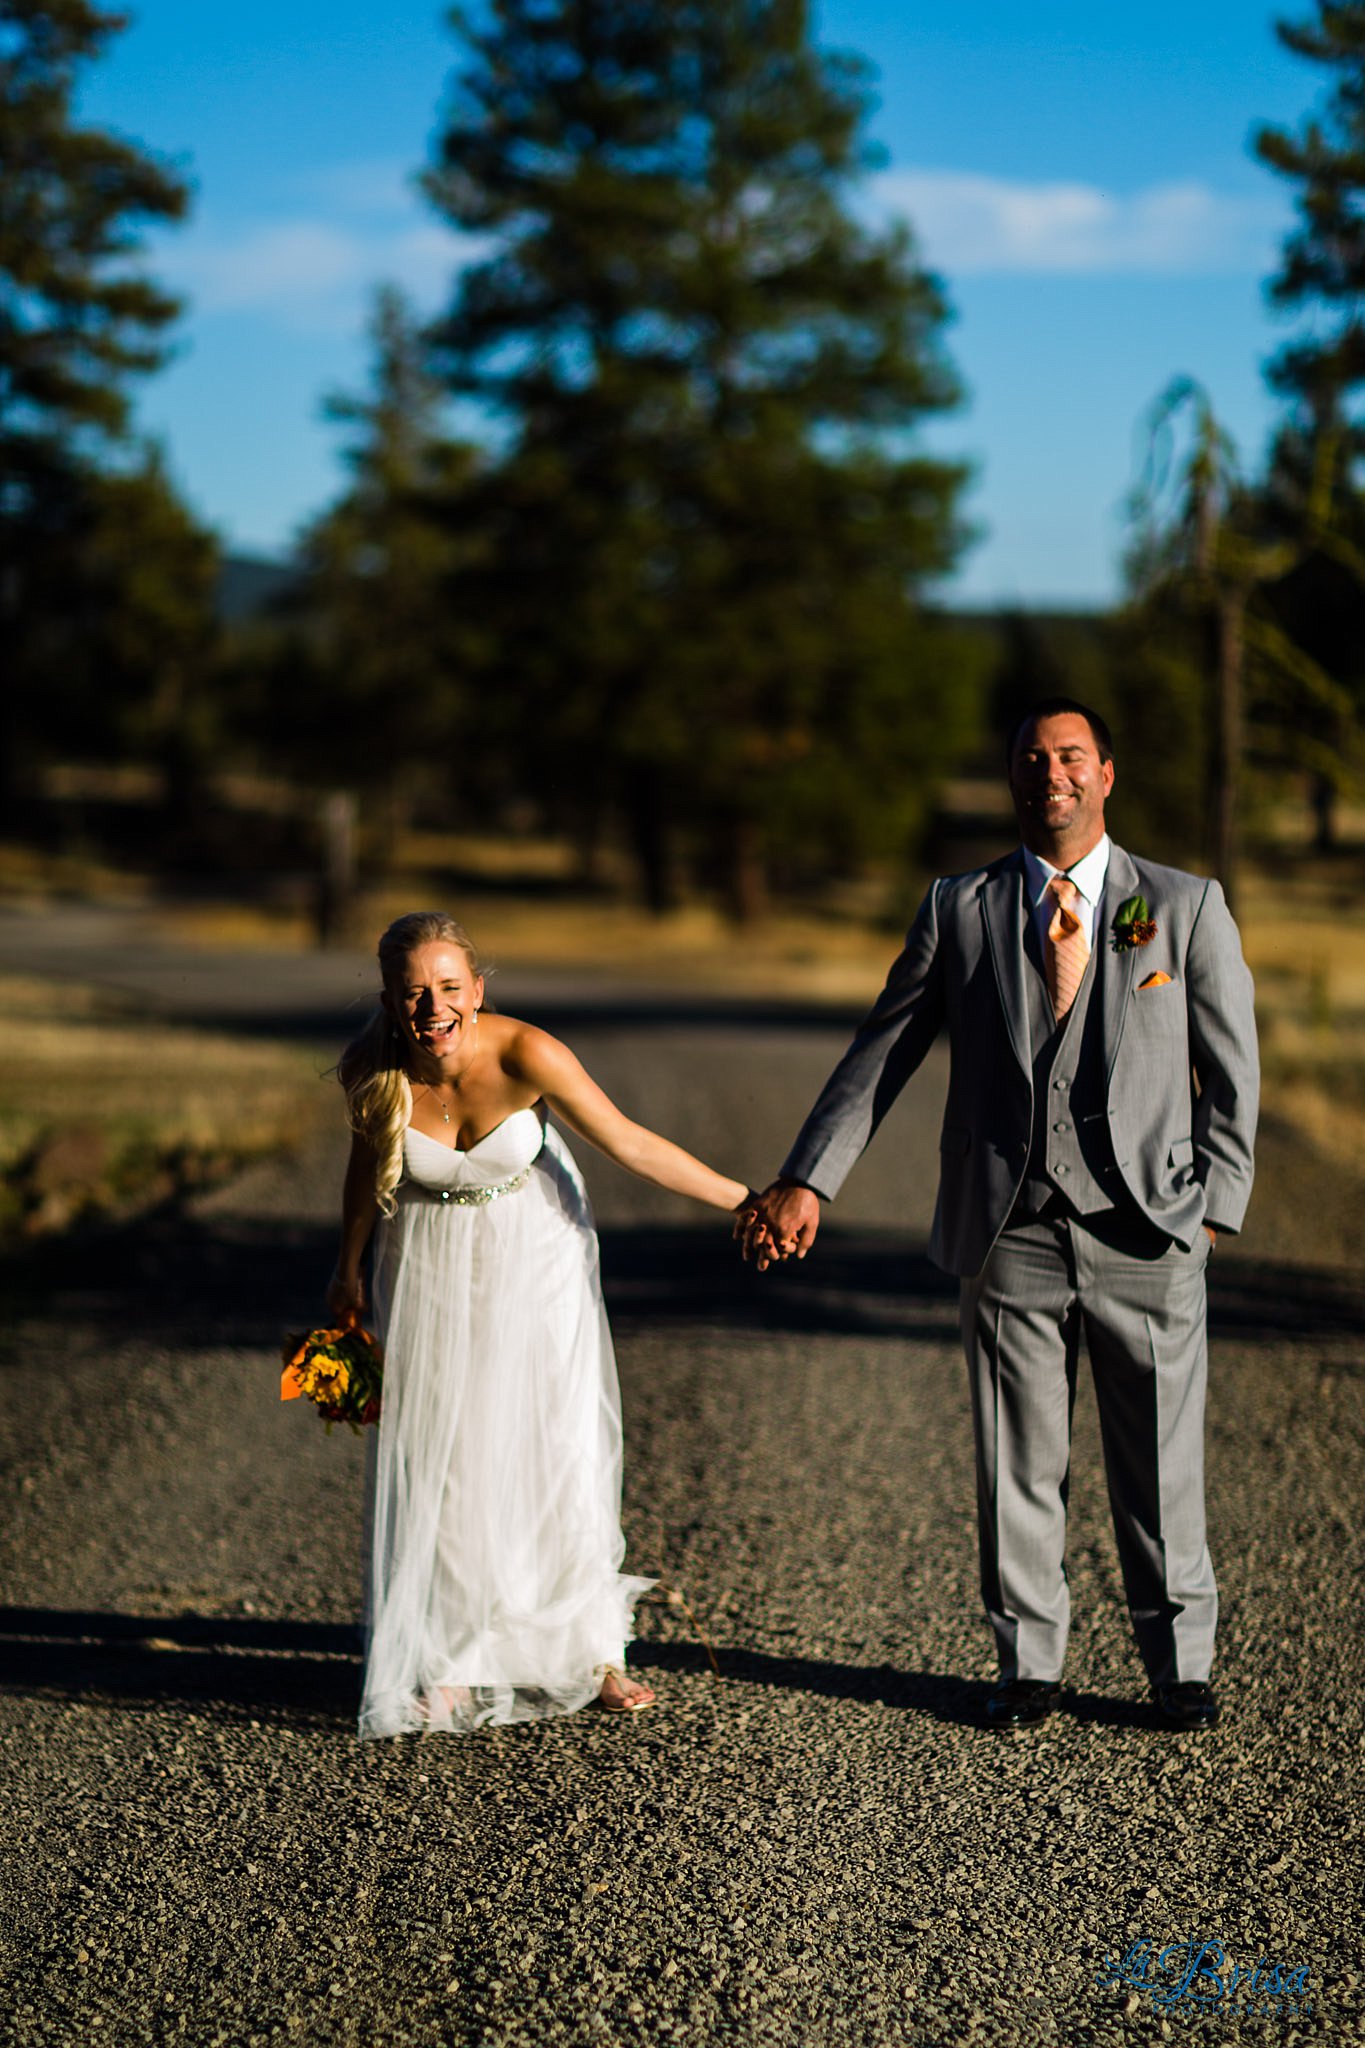 Jackie & Bur | Wedding Photography Preview | Ashland, OR | Chris Hsieh